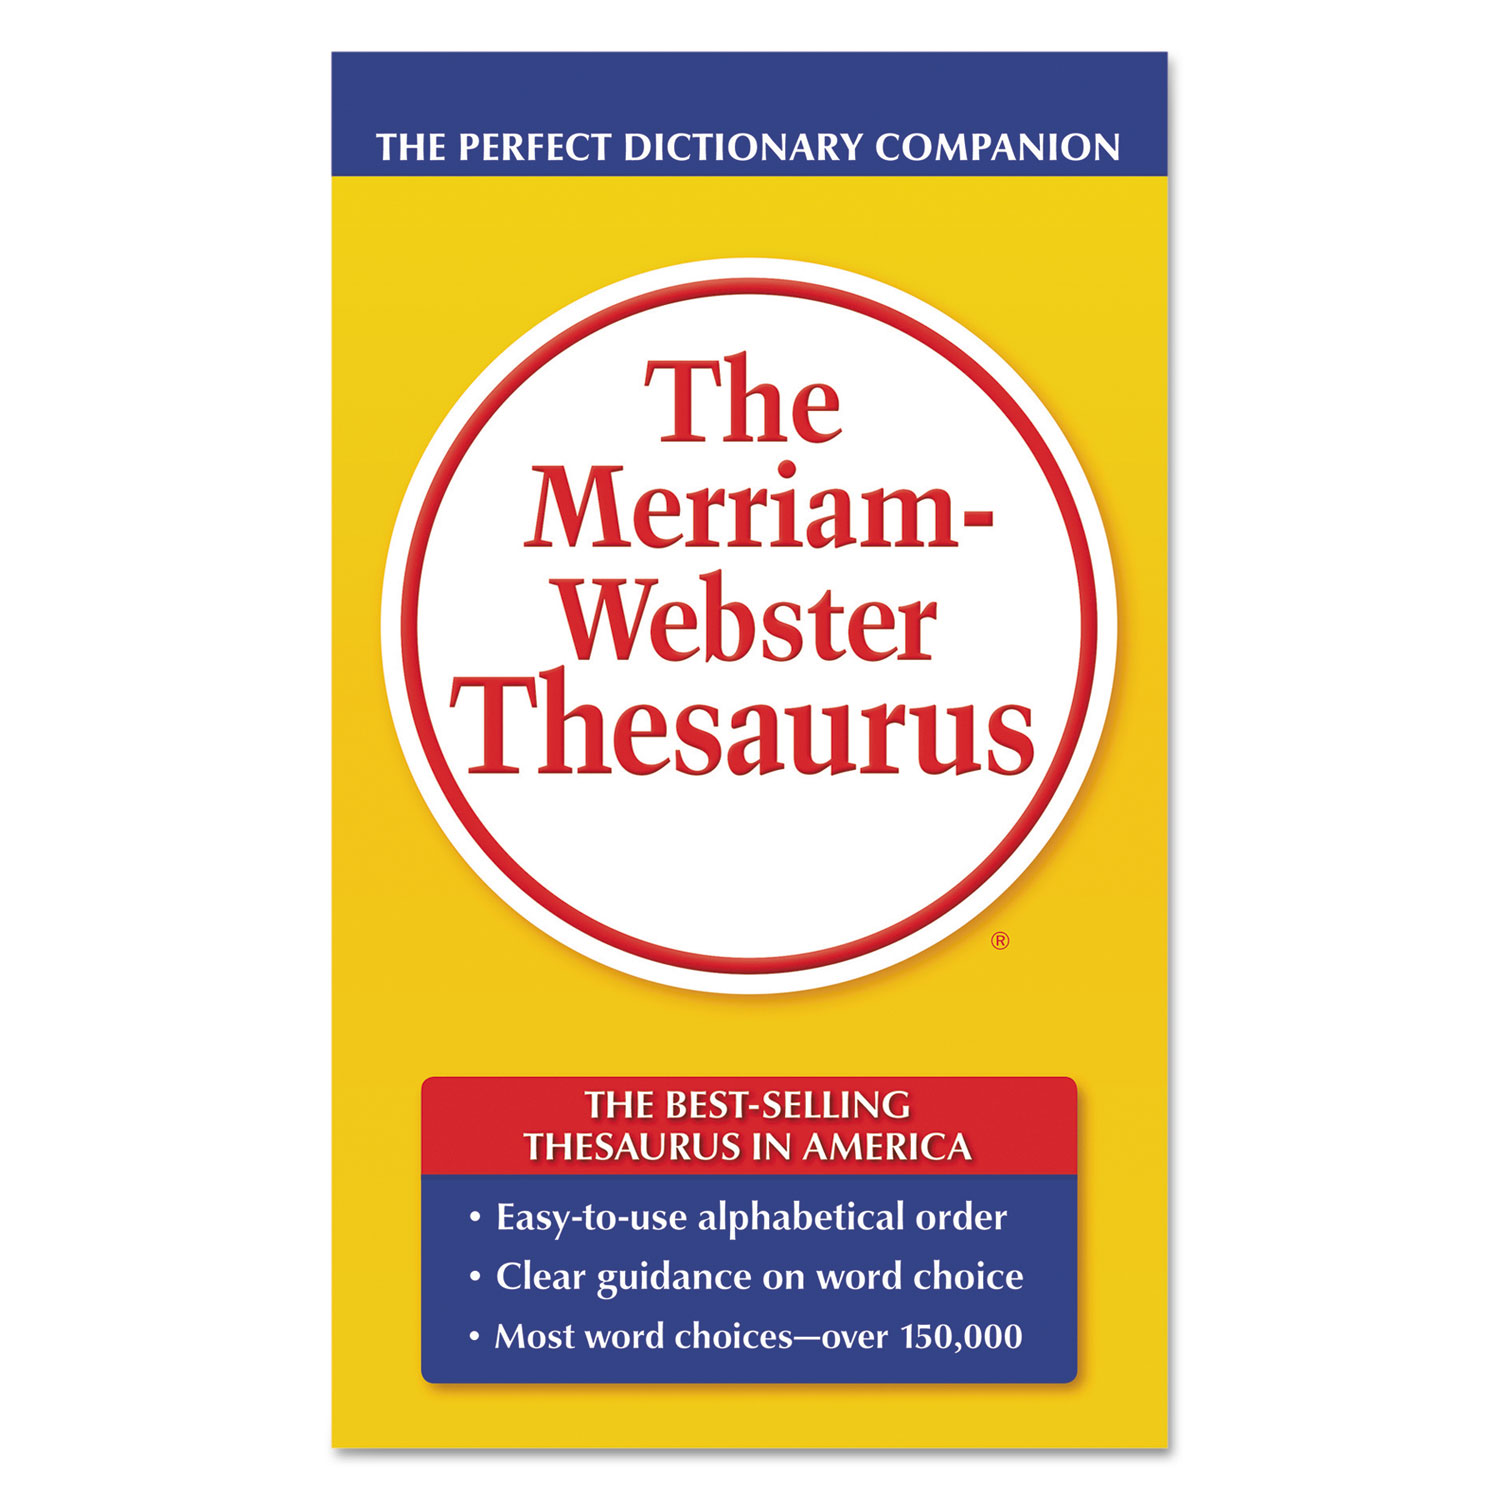  Merriam Webster MER850 The Merriam-Webster Thesaurus, Dictionary Companion, Paperback, 800 Pages (MER850) 